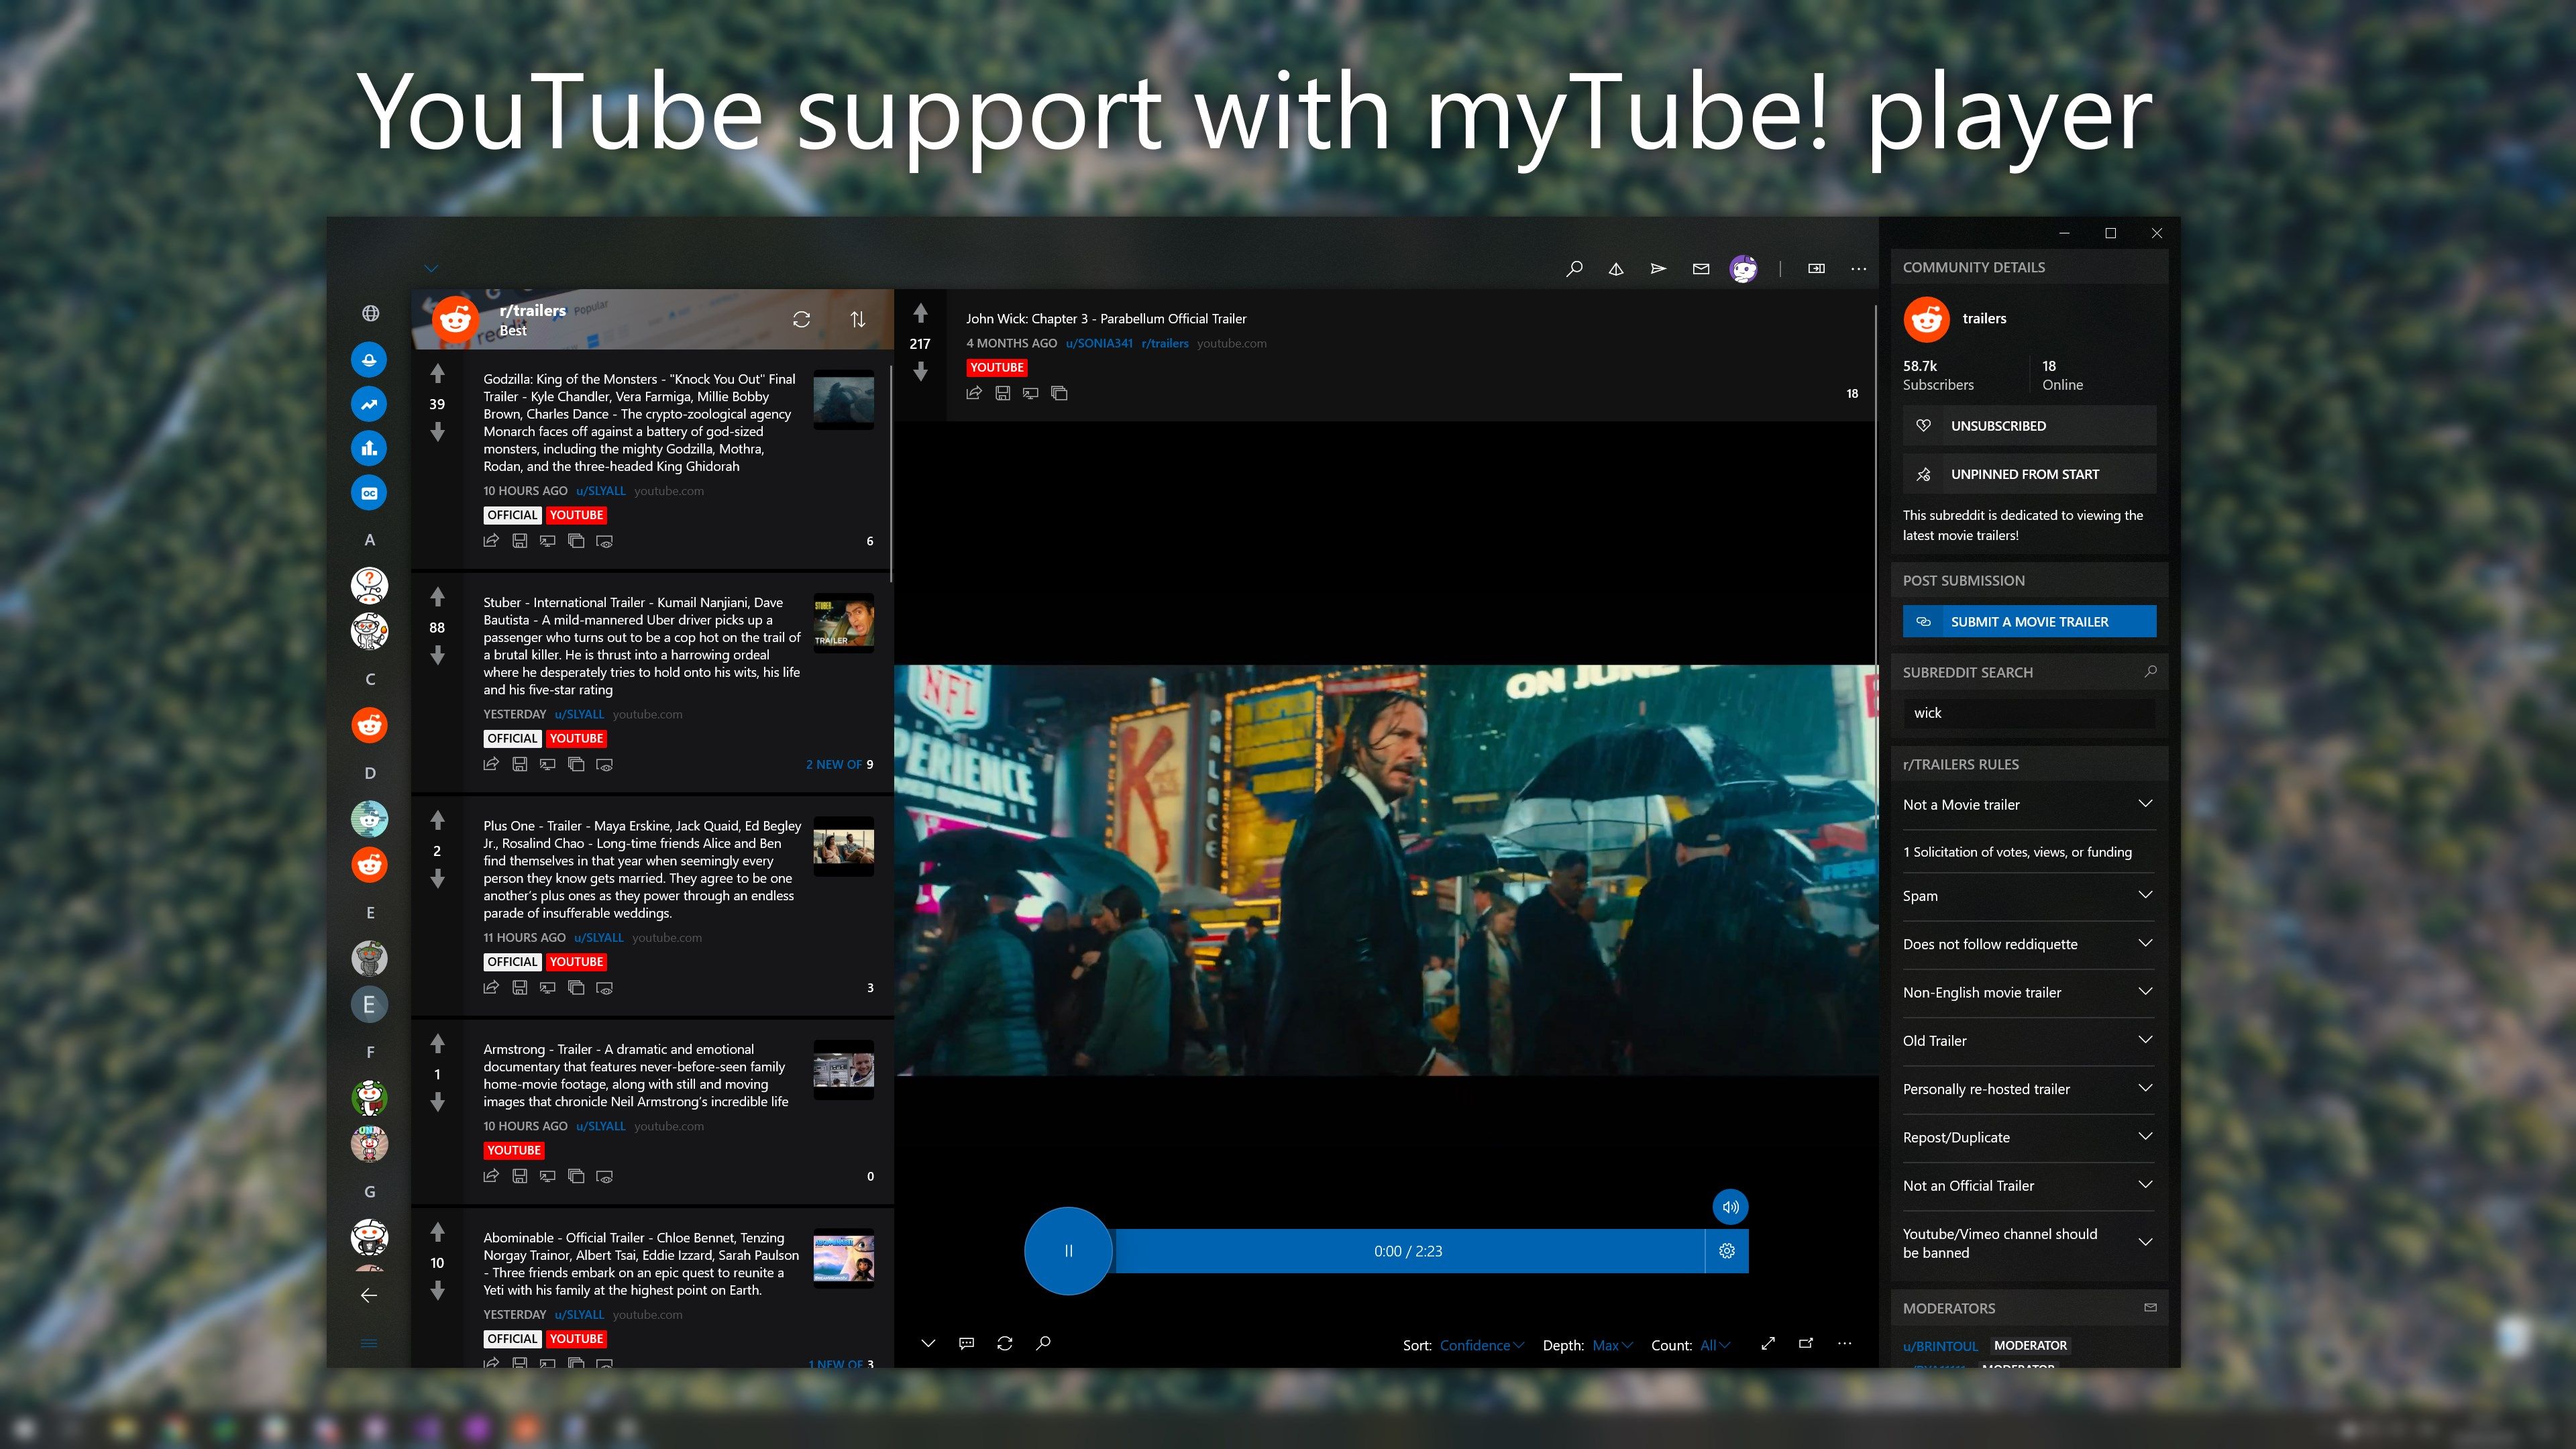 YouTube support with myTube! player